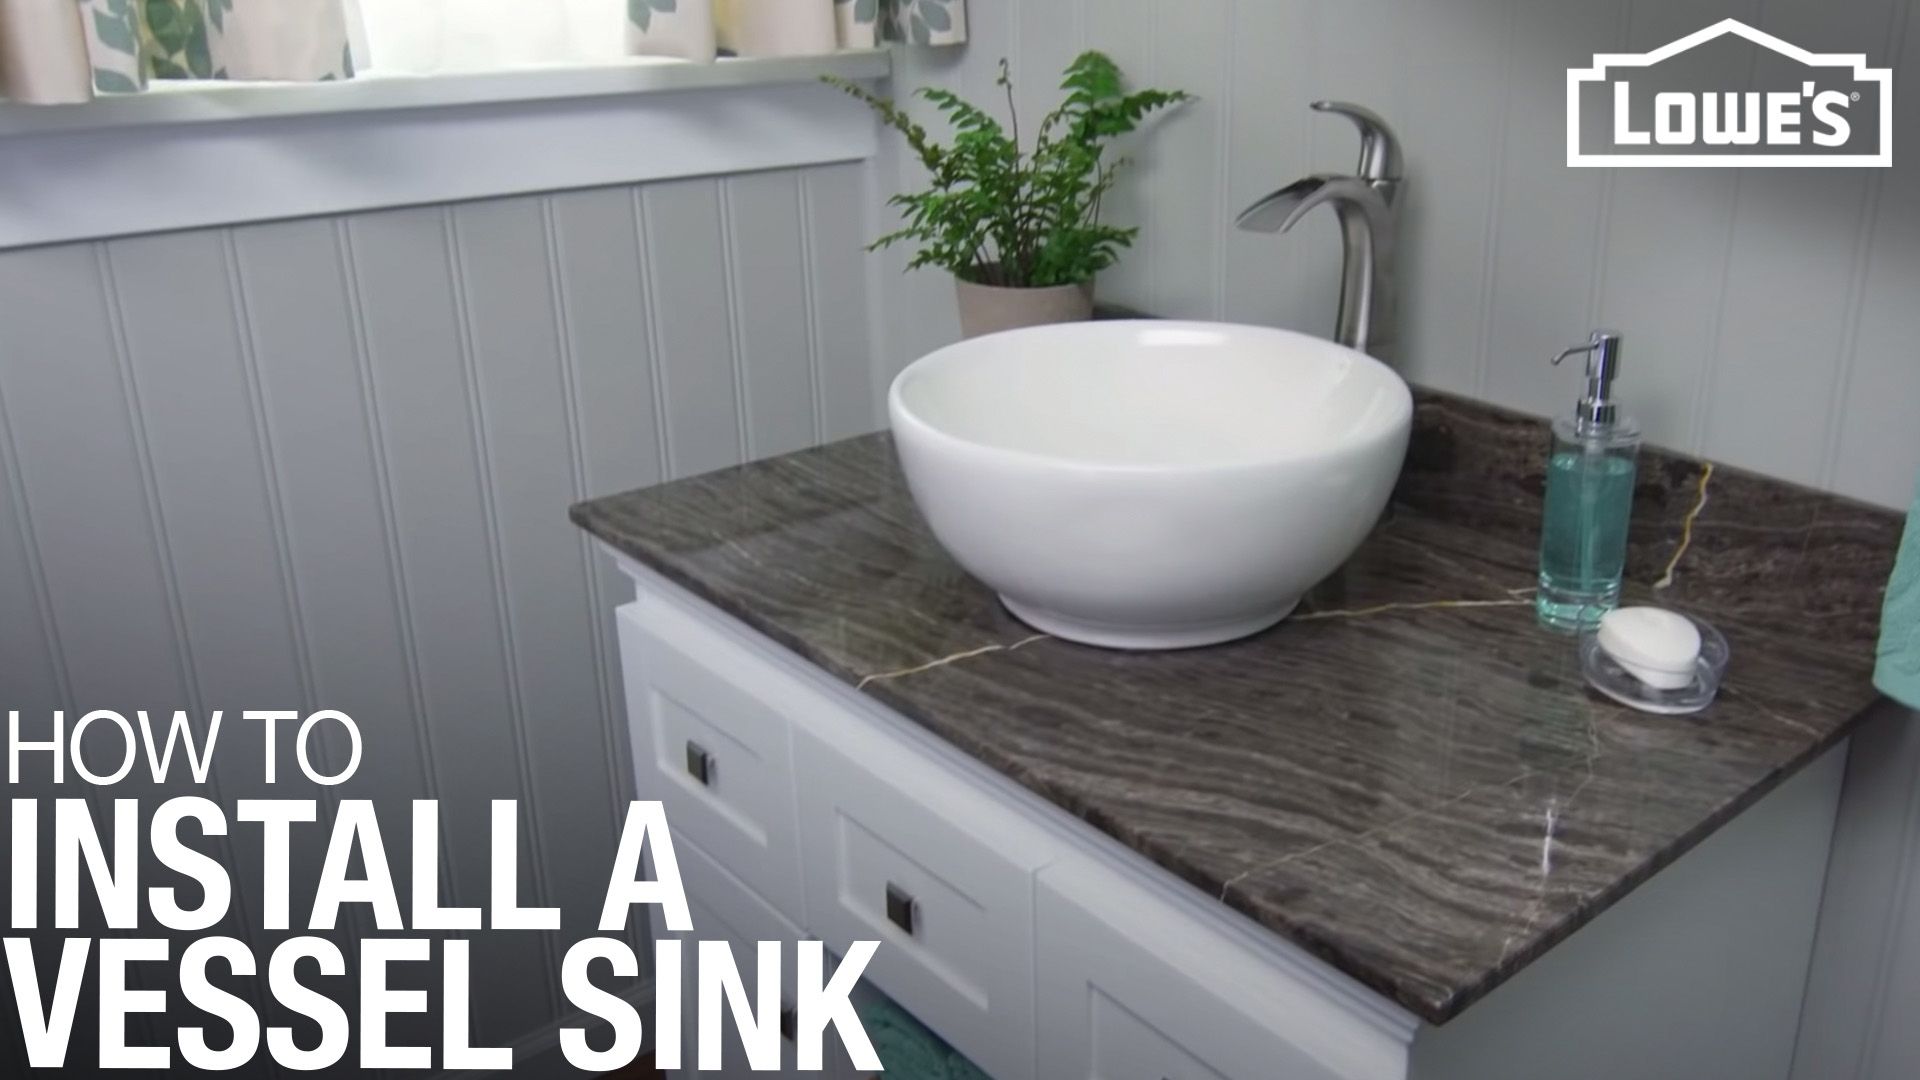 How To Install A Vessel Sink, What Kind Of Vanity Do I Need For A Vessel Sink